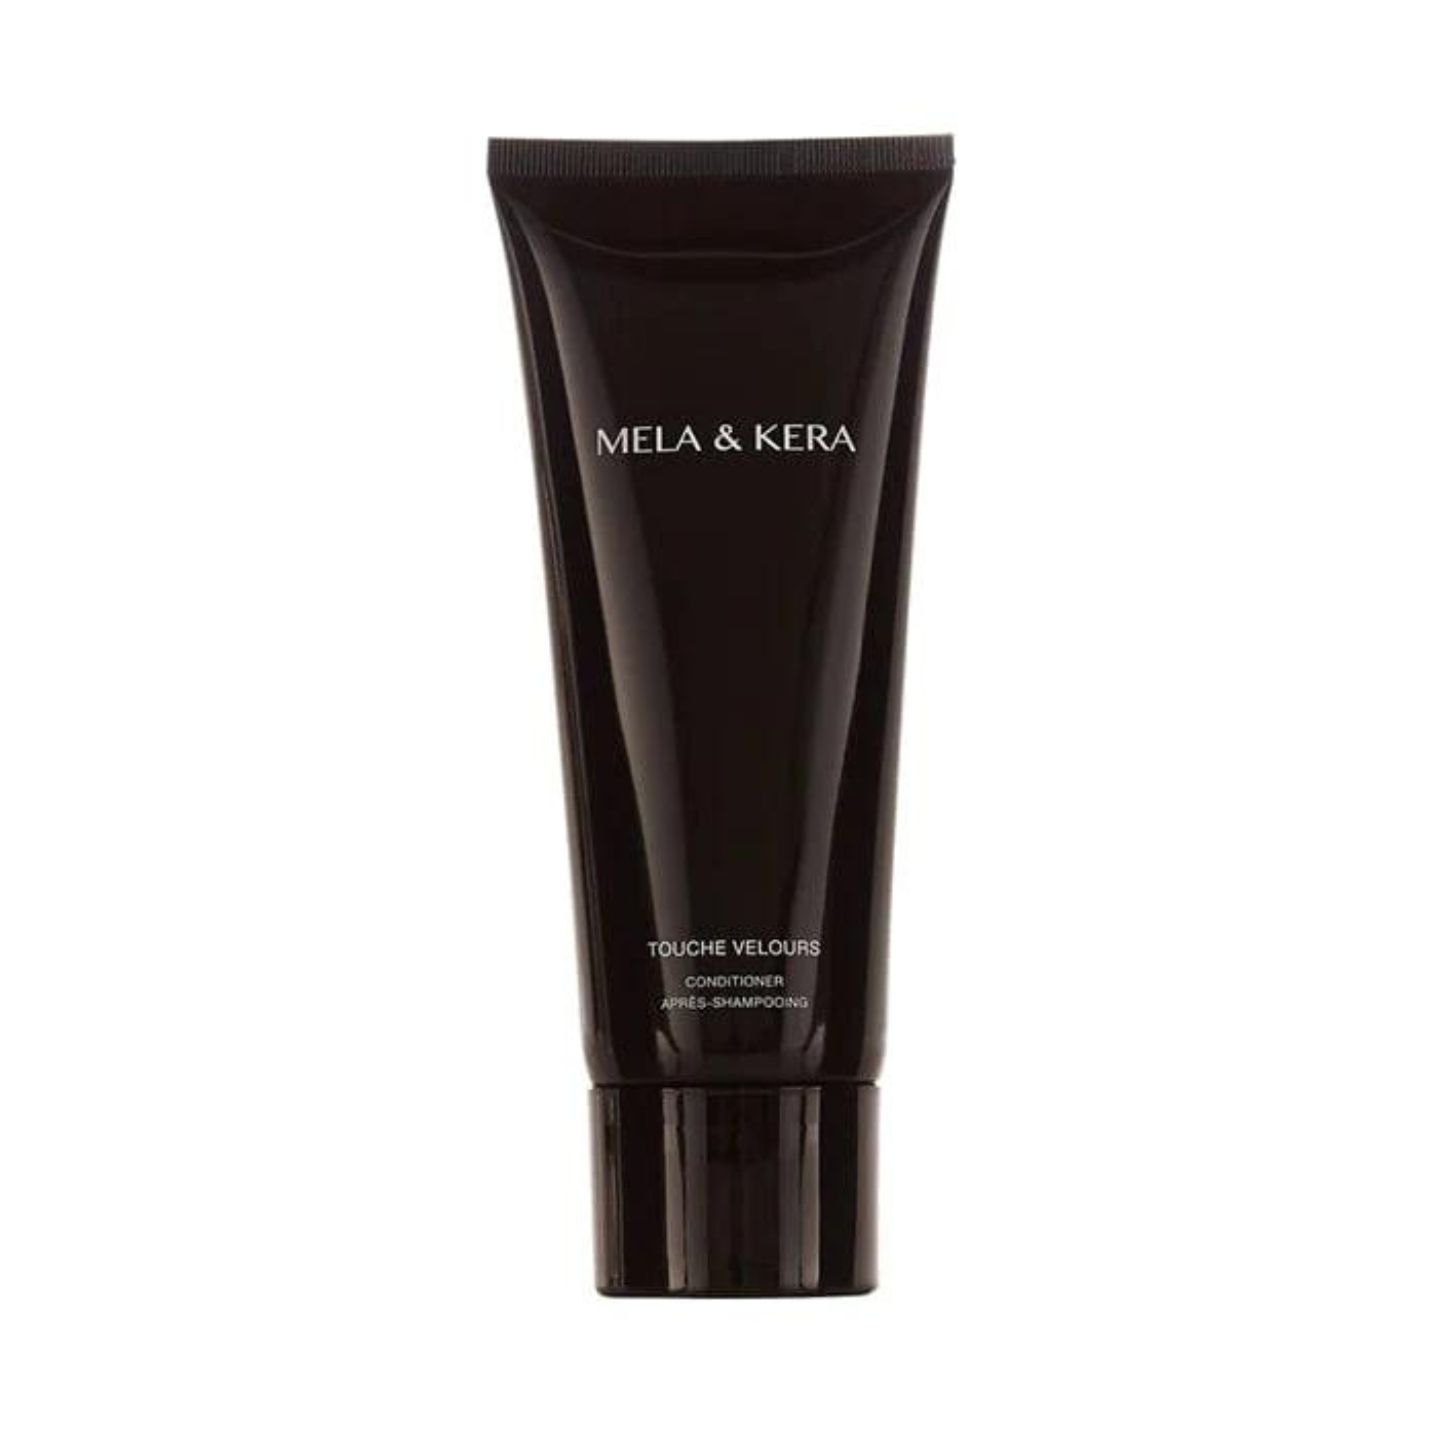 This incredibly luxe conditioner imbues hair with weightless moisture and luminosity. Mela & Kera Touche Velours Conditioner, $46 for 200ml, melaandkera.com